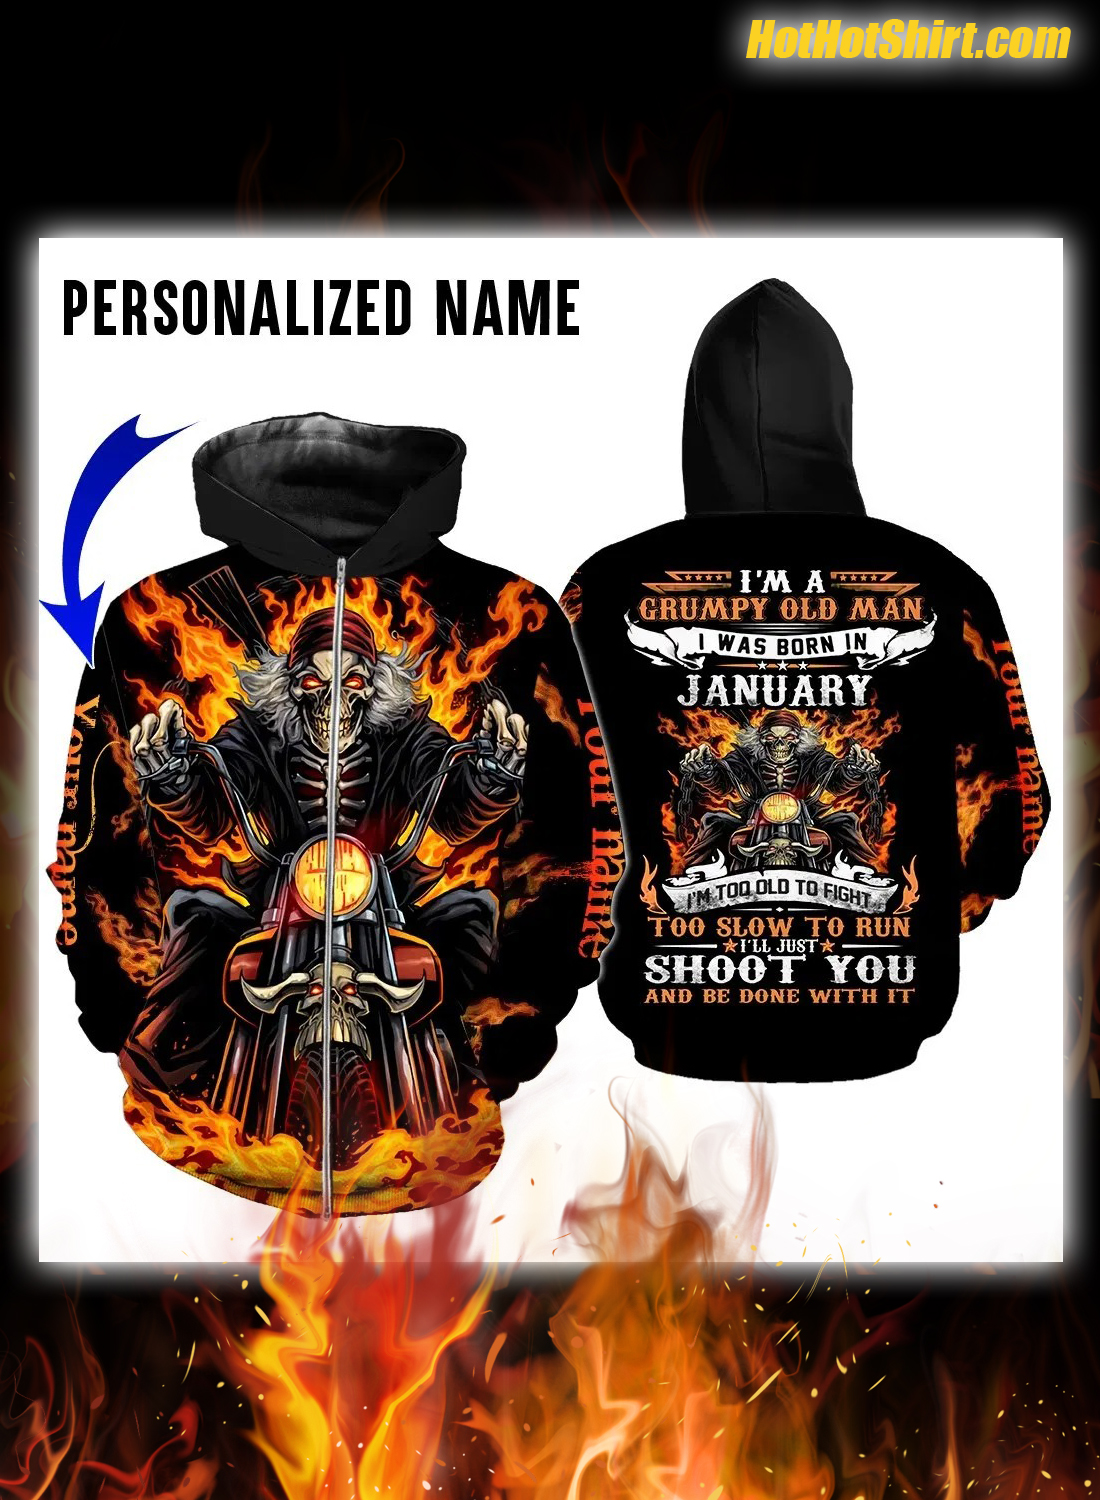 Personalized Name January Guy Motorcycle I'm A Grumpy Old Man 3D Hoodie